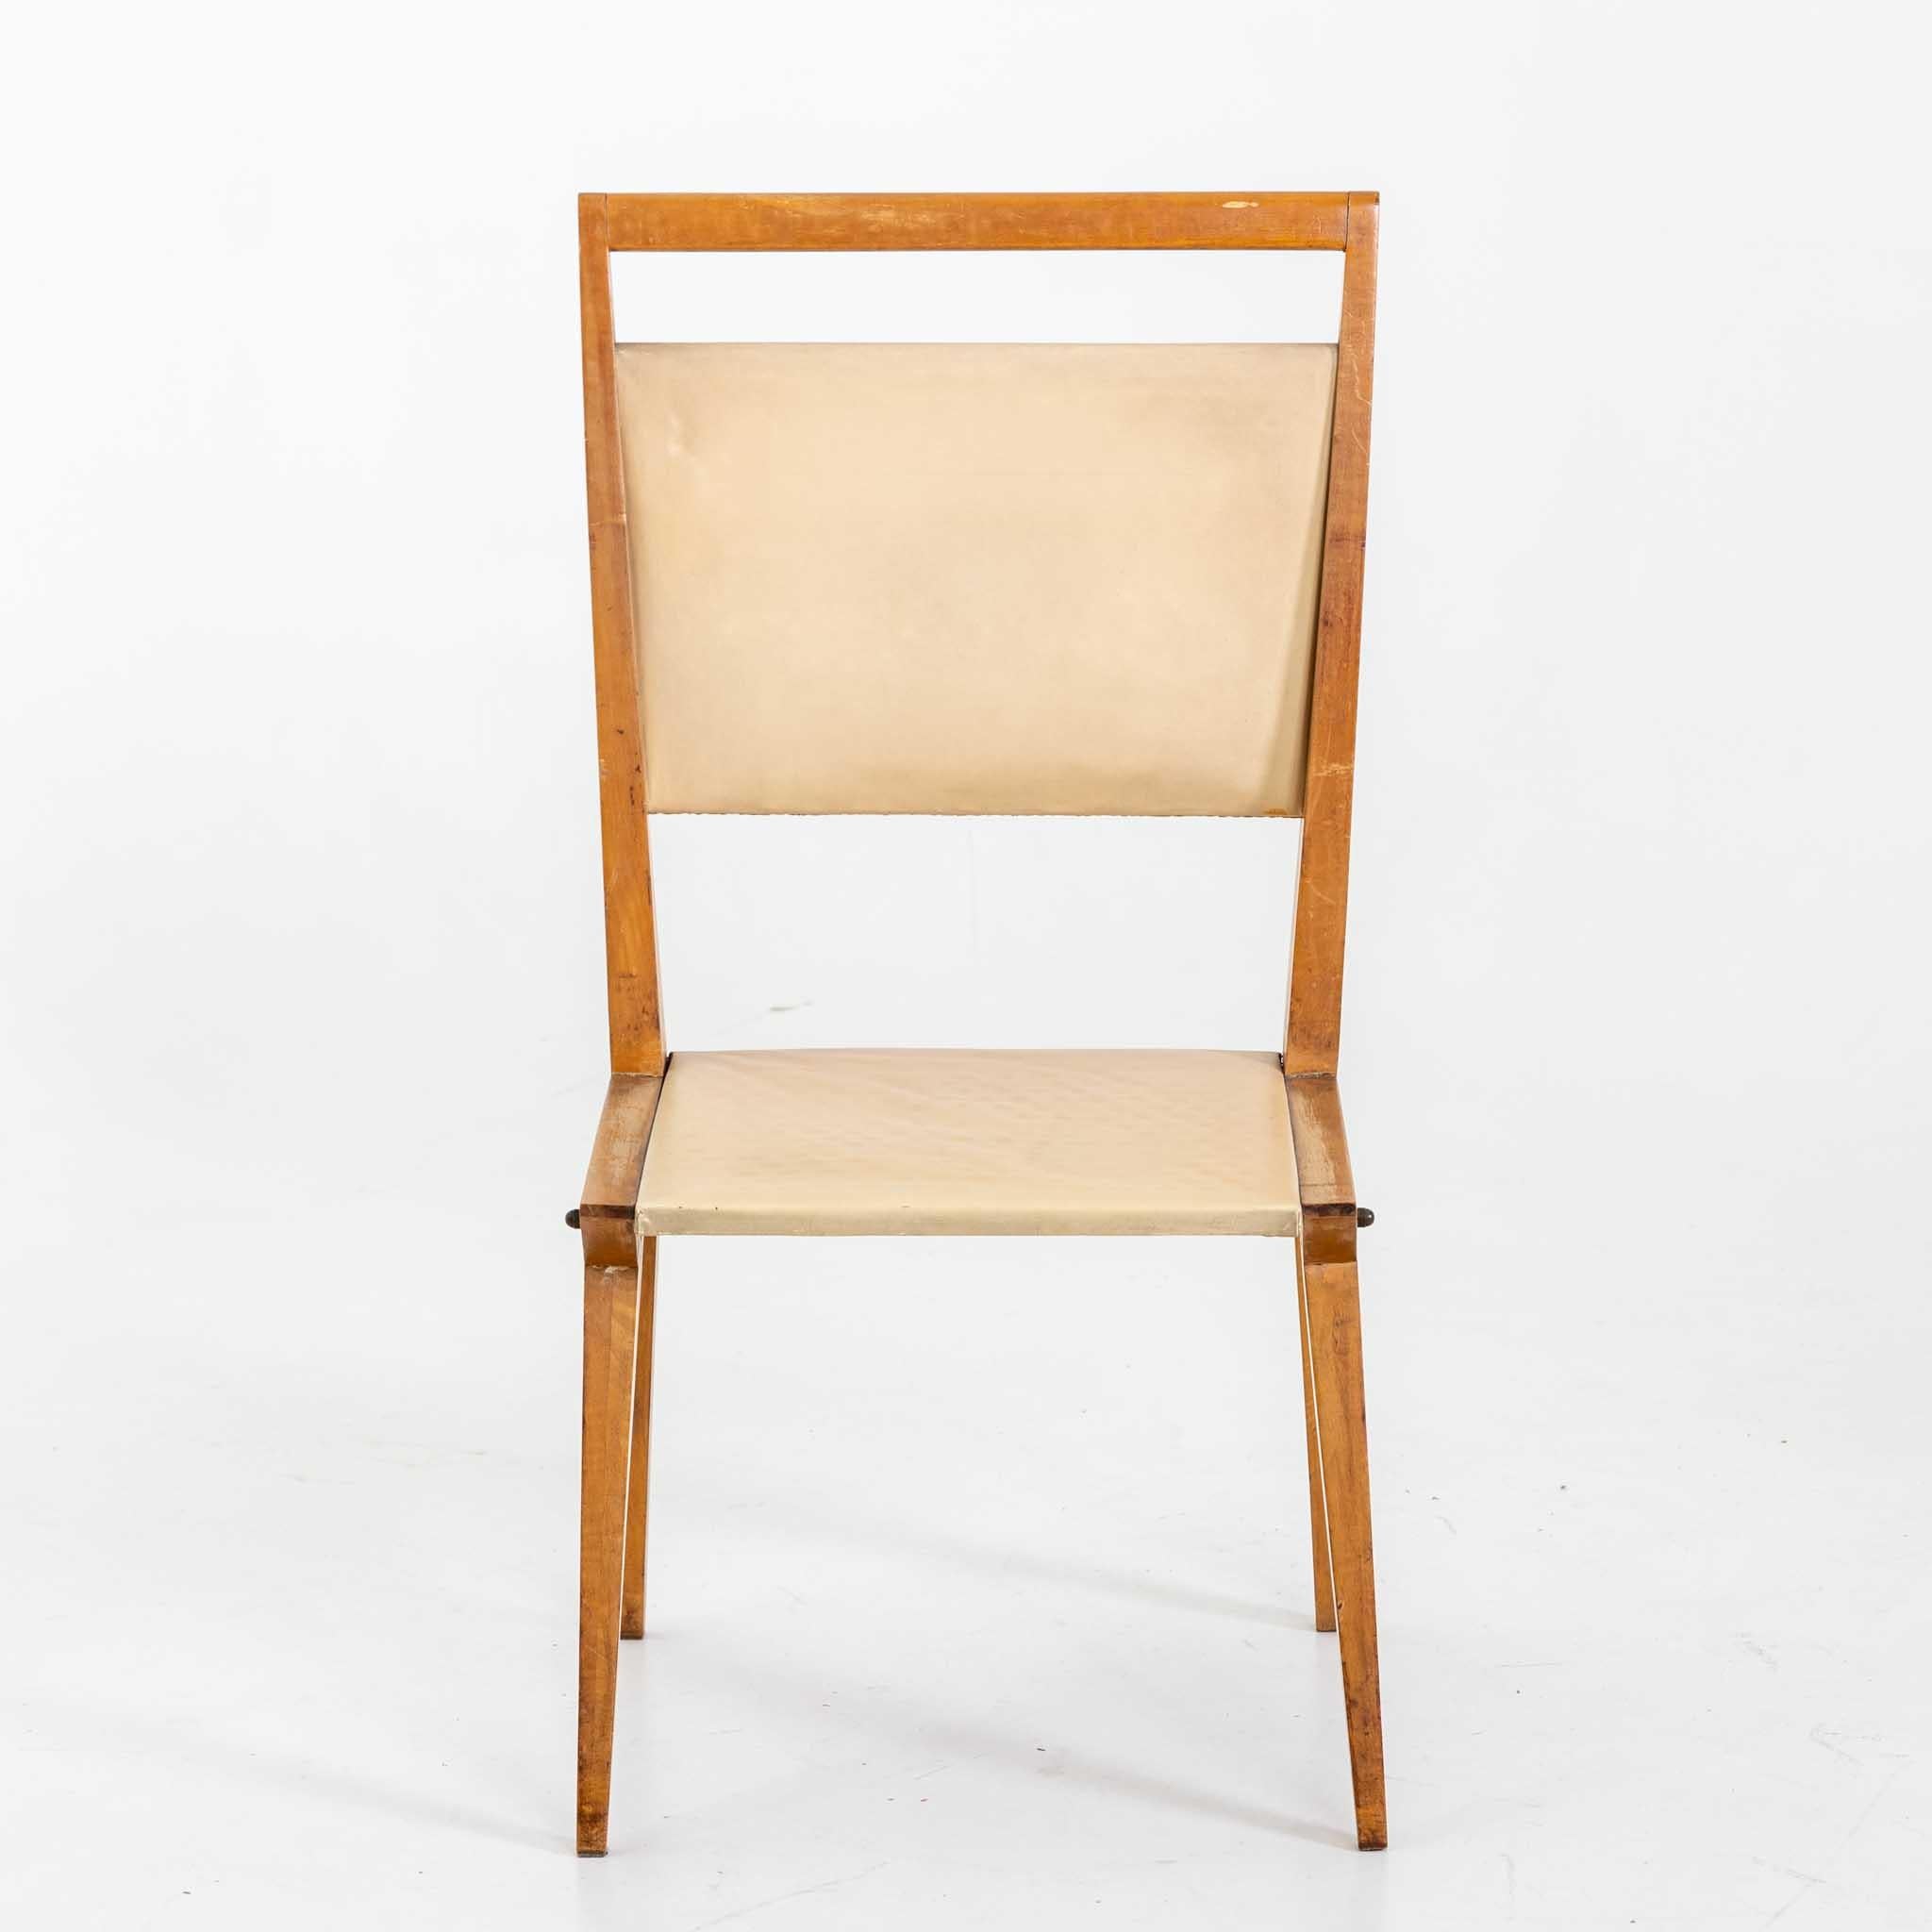 Italian Dining Chairs, Designed by Vittorio Armellini, Italy, Mid-20th Century For Sale